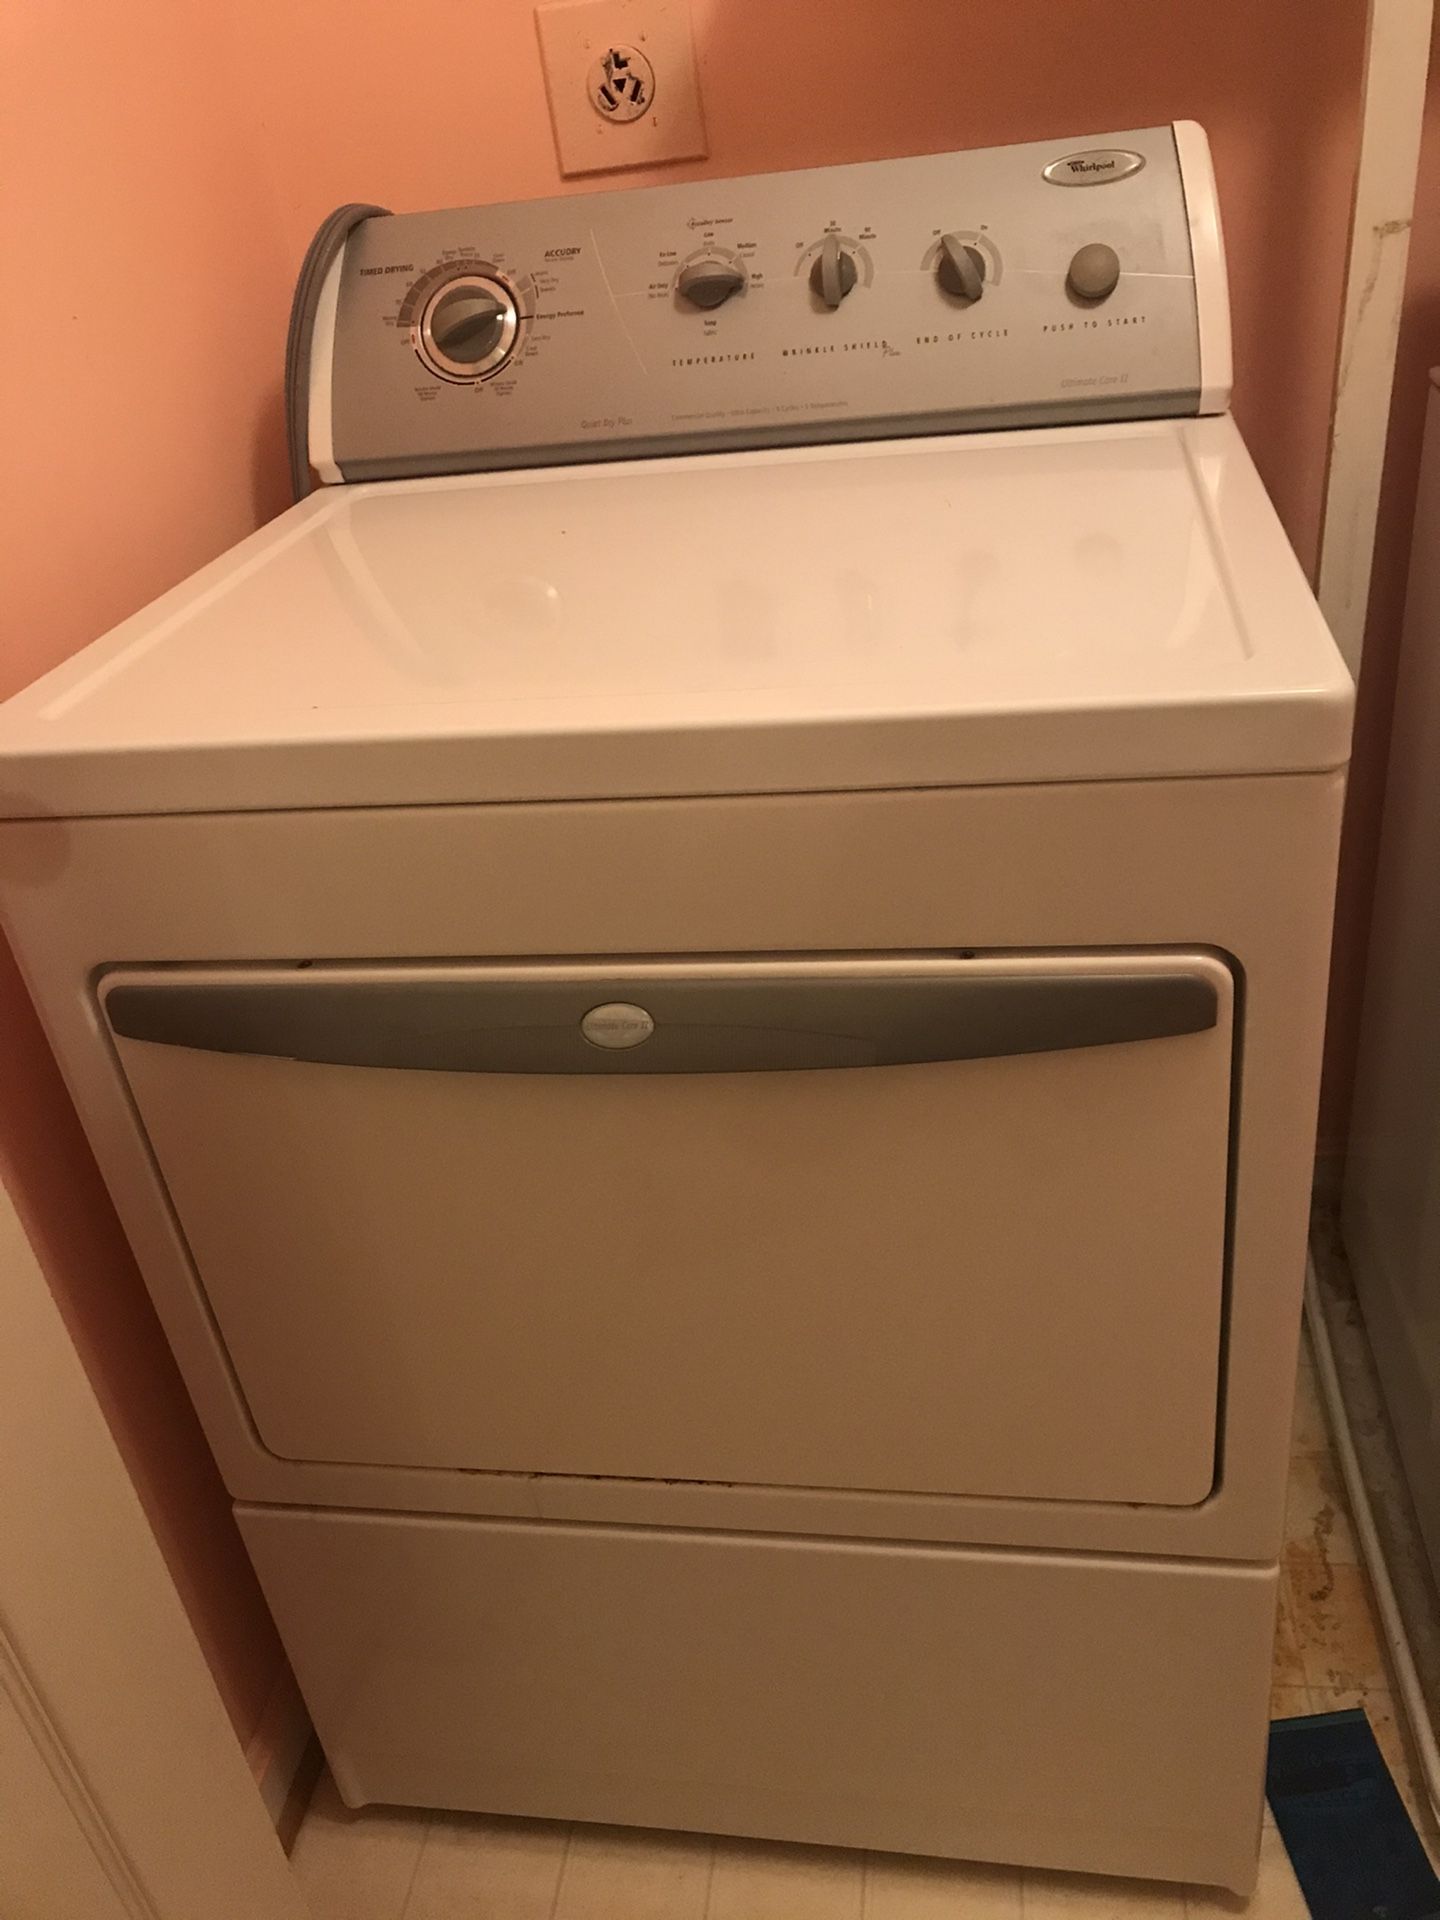 “Whirlpool” Dryer for sale